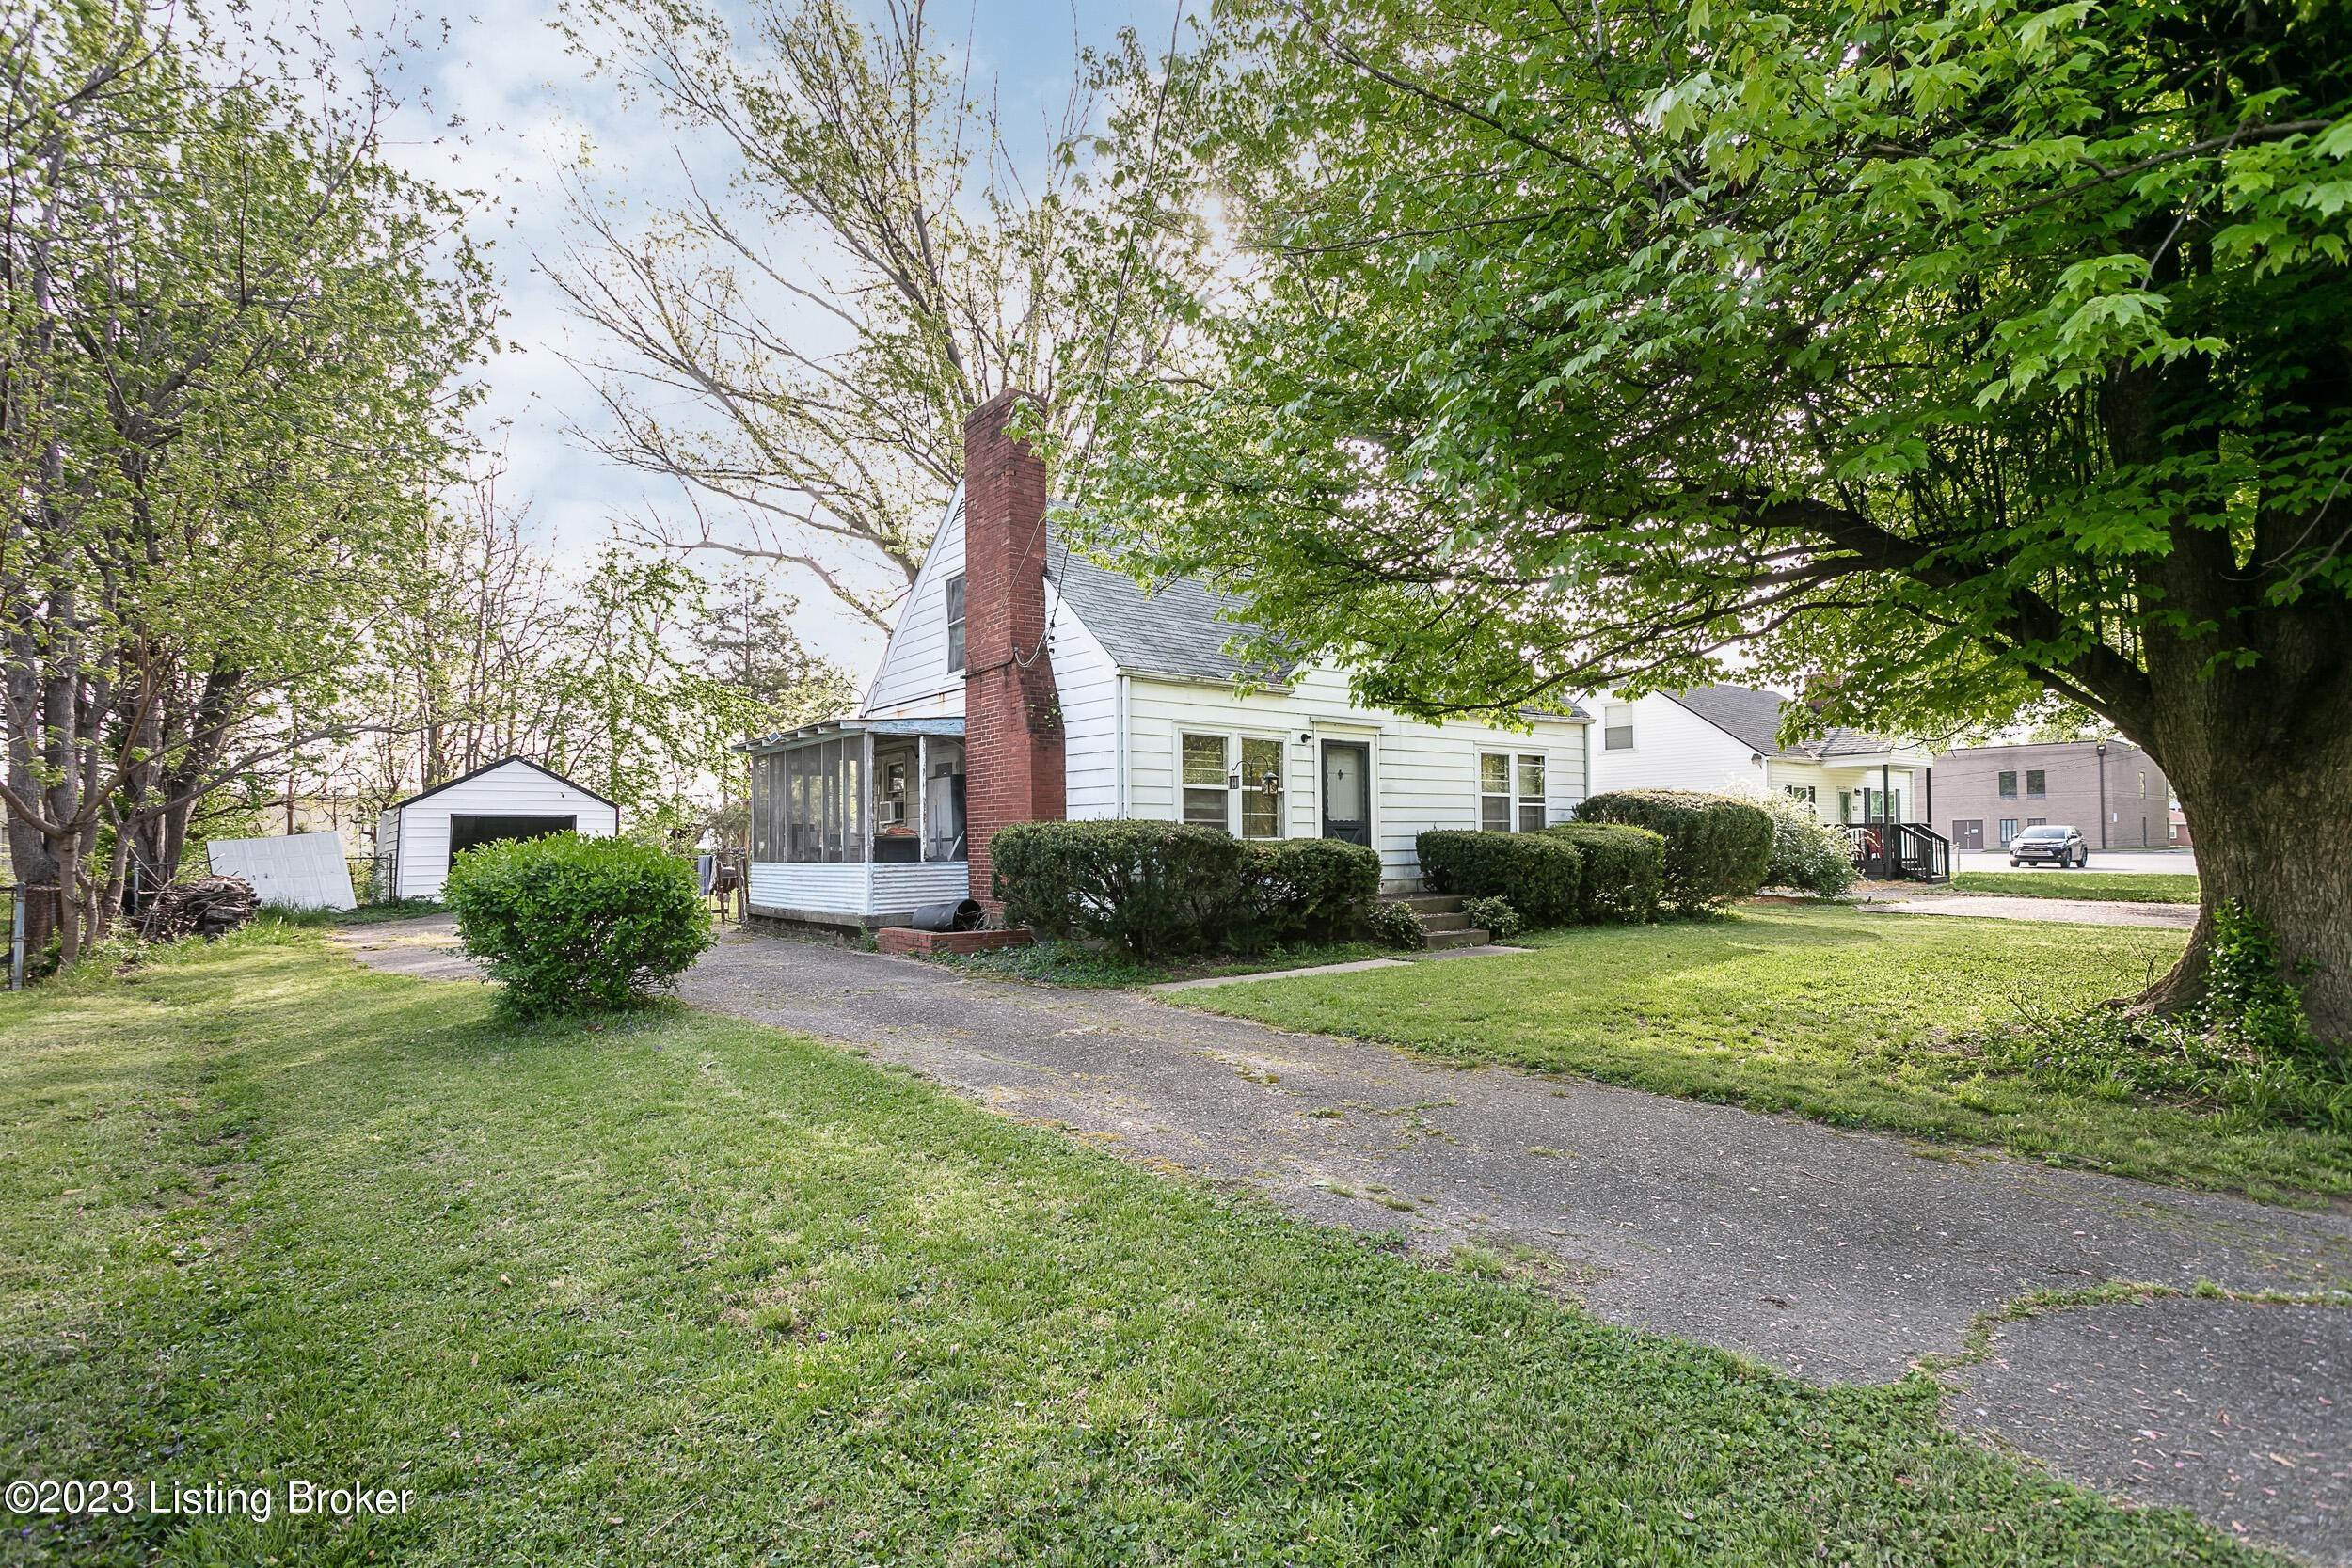 3. Single Family at Louisville, KY 40219